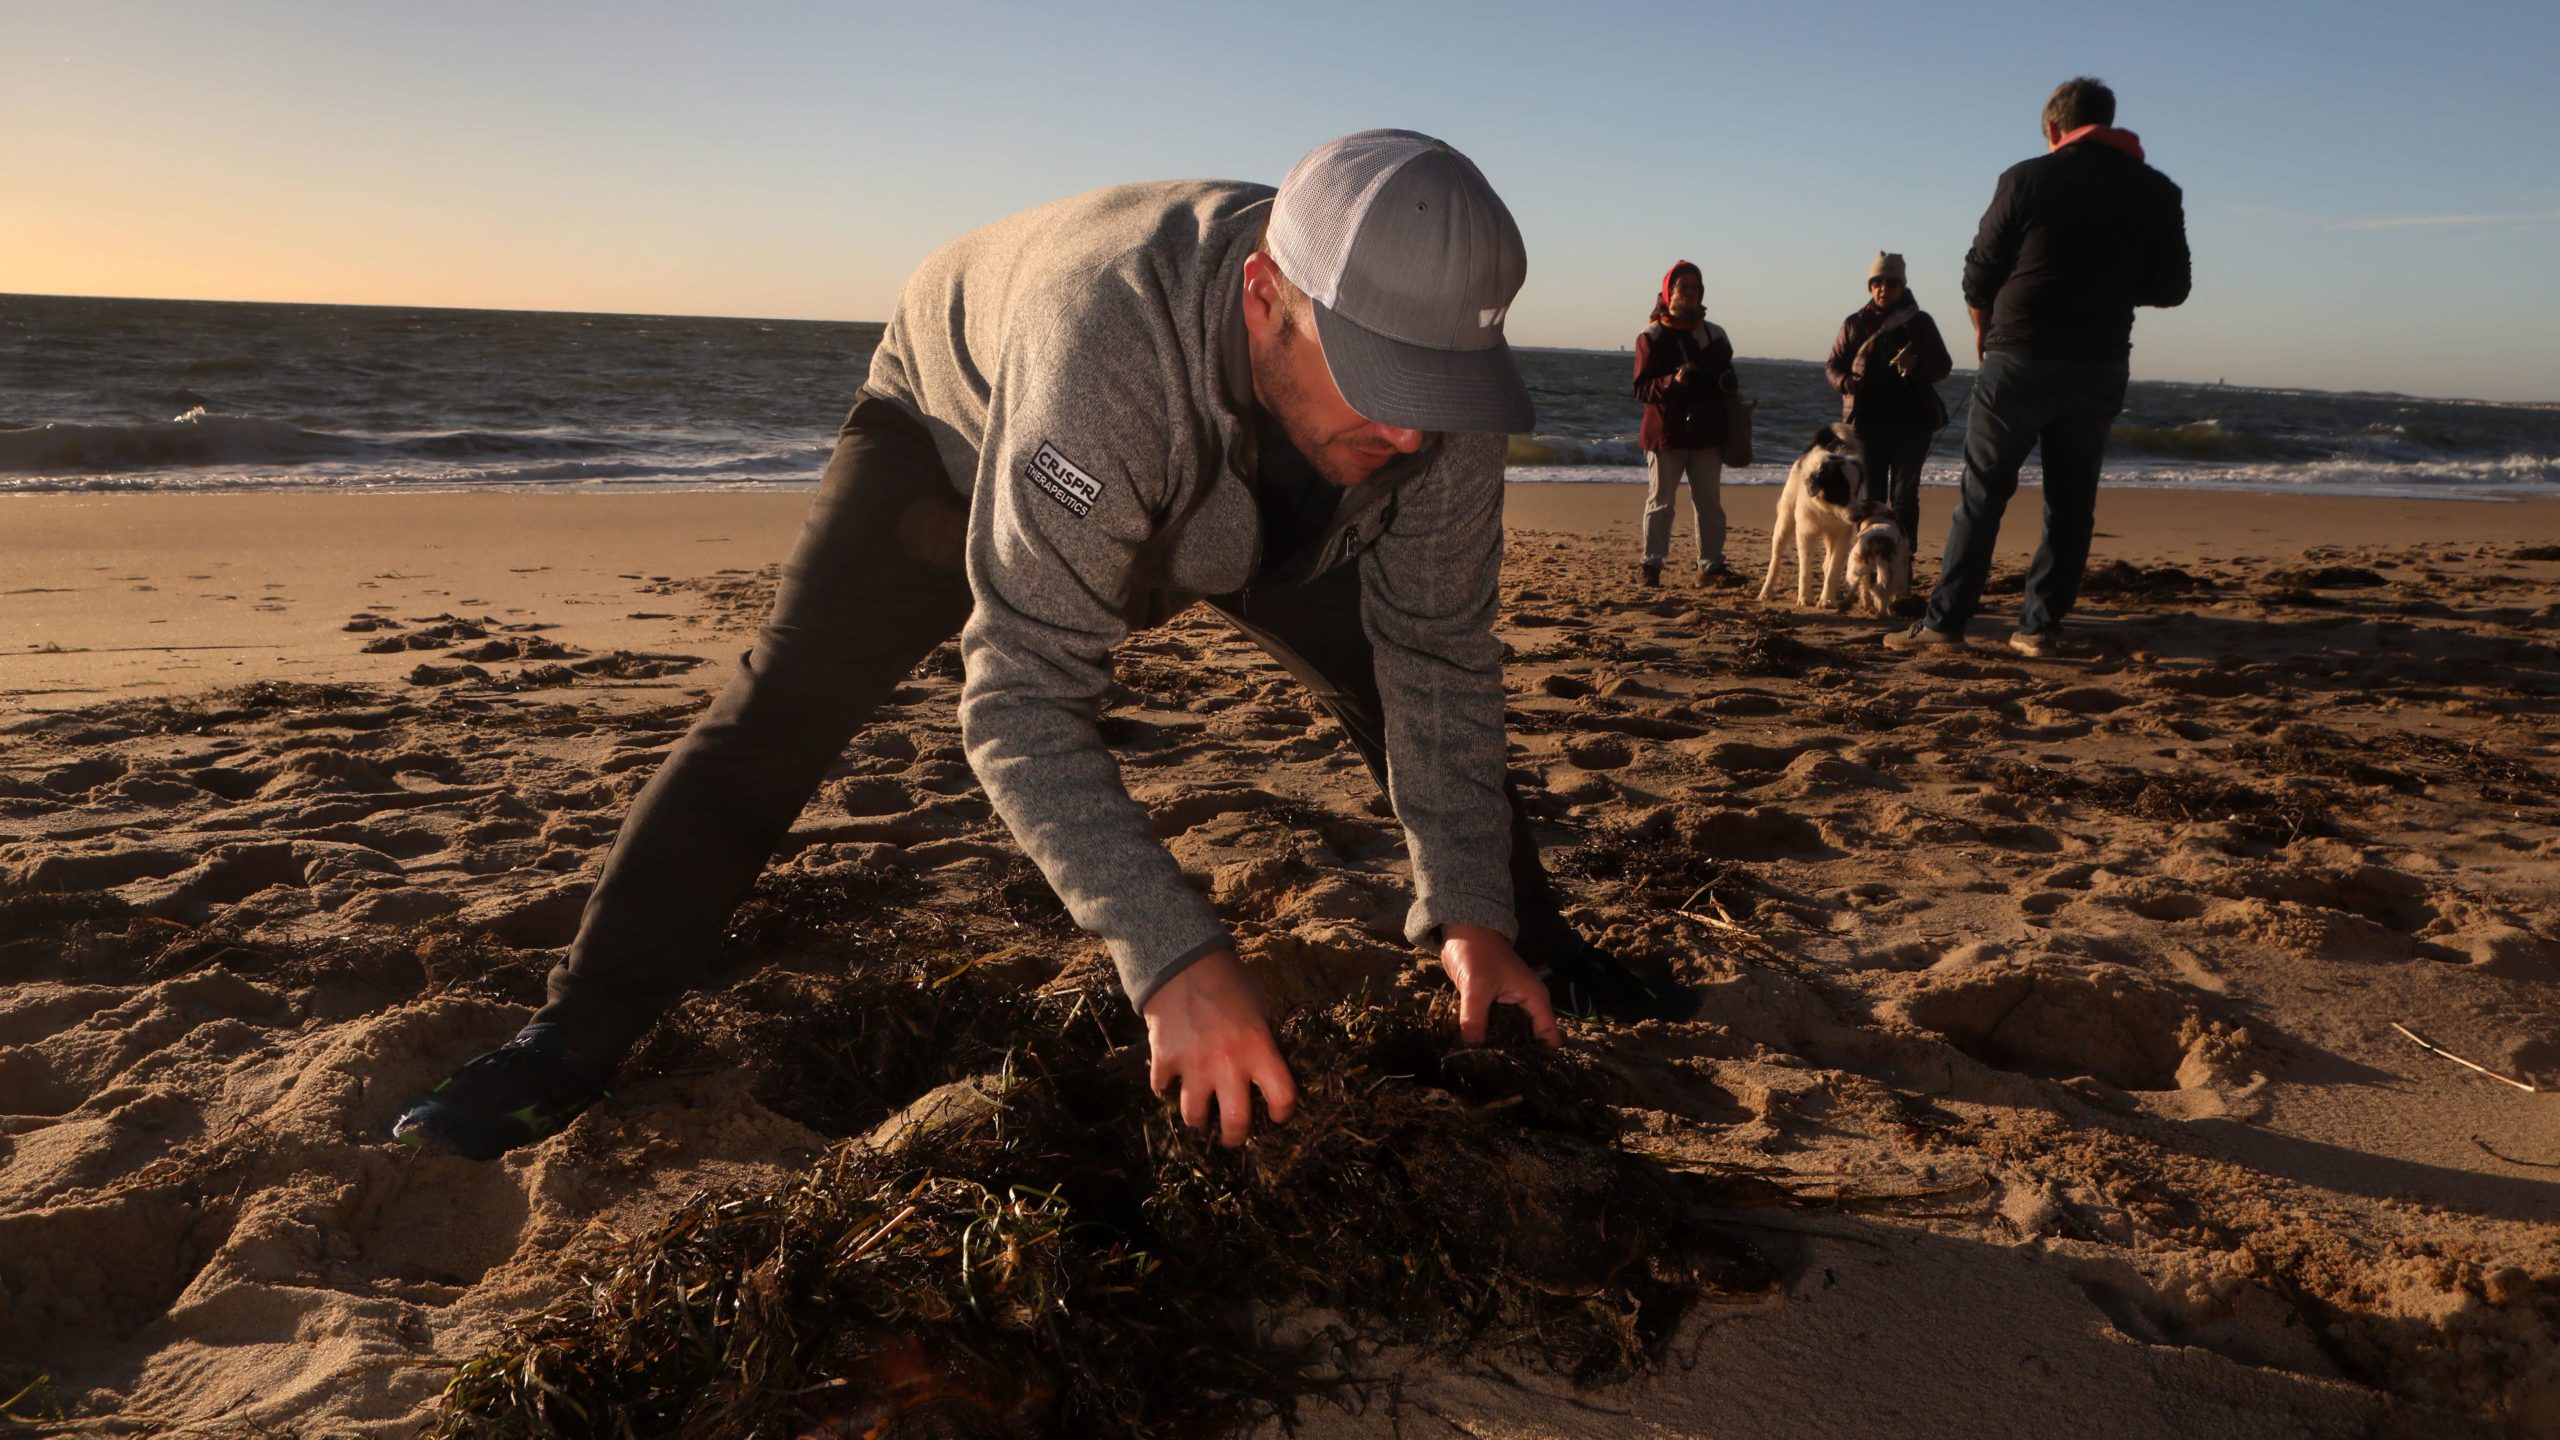 Michael Weinstein from Truro finds a cold-stunned sea turtle and covers it with seaweed to keep it warm on Great Hallow Beach in Cape Cod on Dec. 3, 2020. (Photo: Lauren Owens Lambert / AFP, Getty Images)